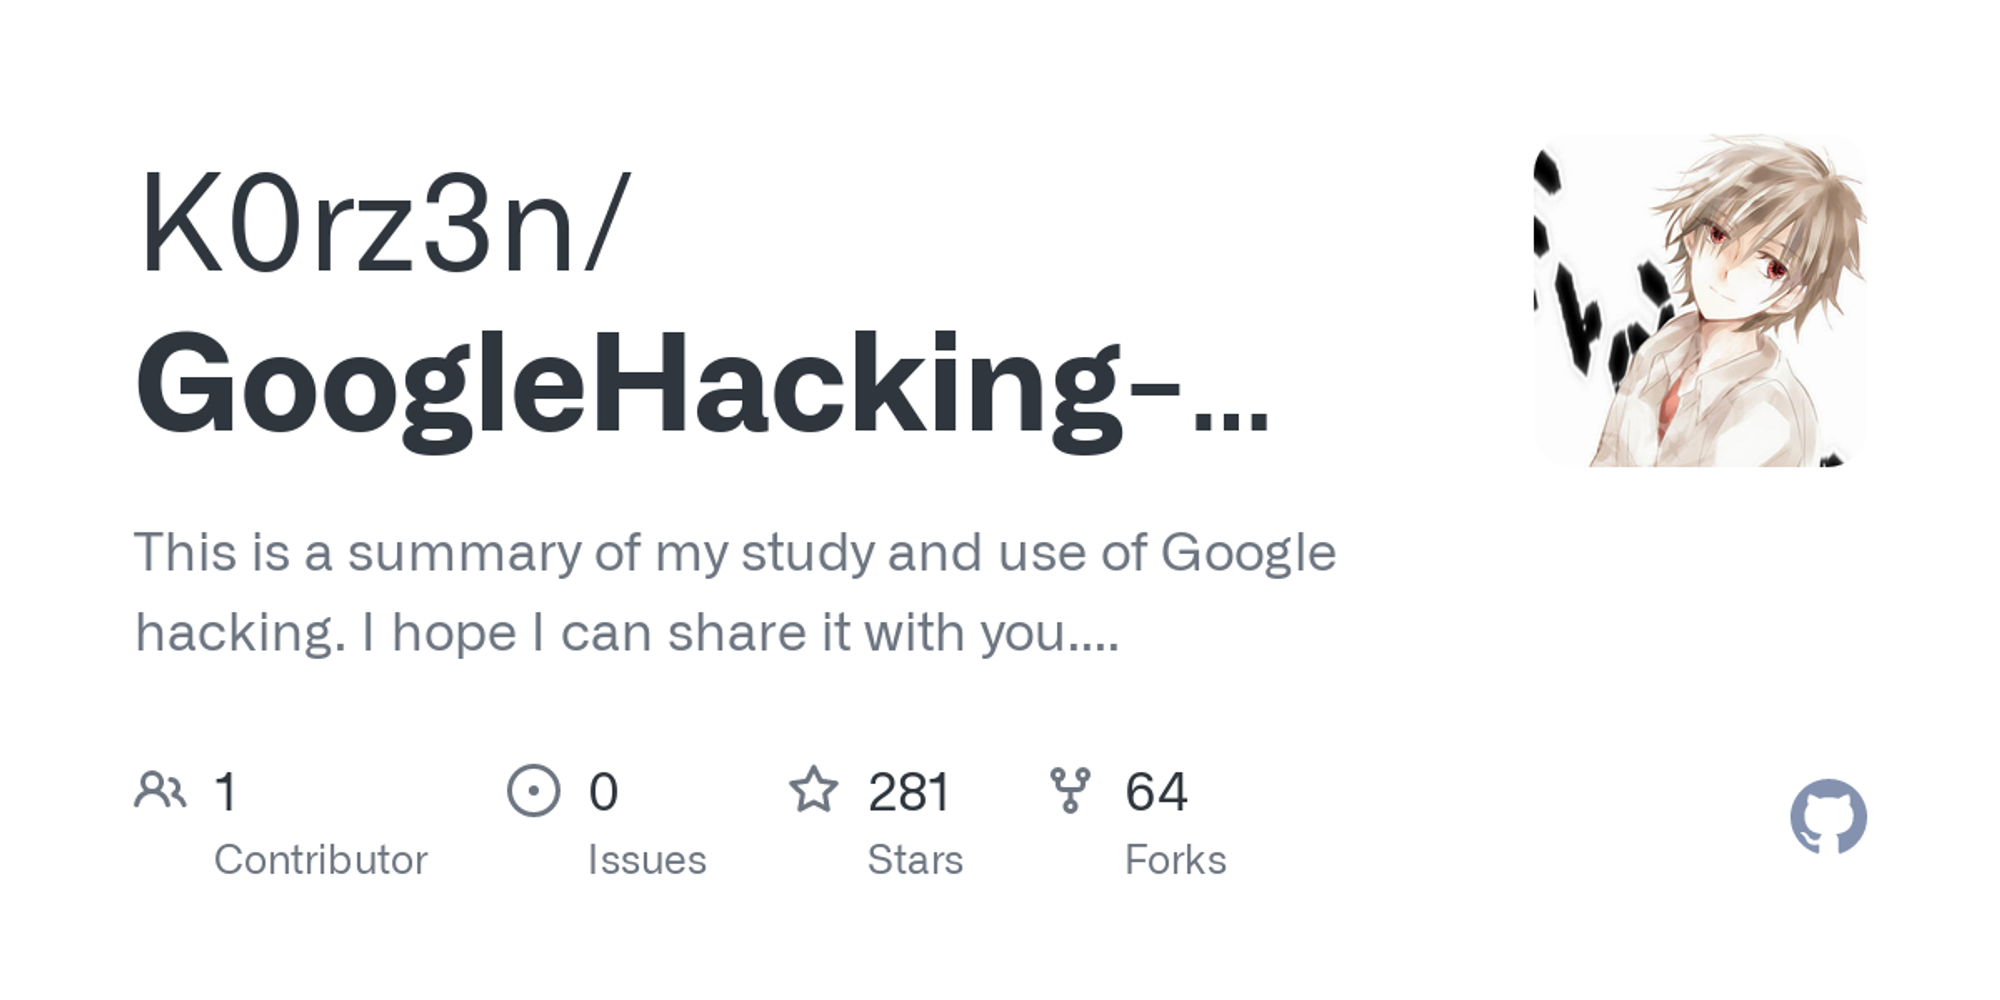 GitHub - K0rz3n/GoogleHacking-Page: This is a summary of my study and use of Google hacking. I hope I can share it with you. If you like, please give me a star or fork it, thank you.